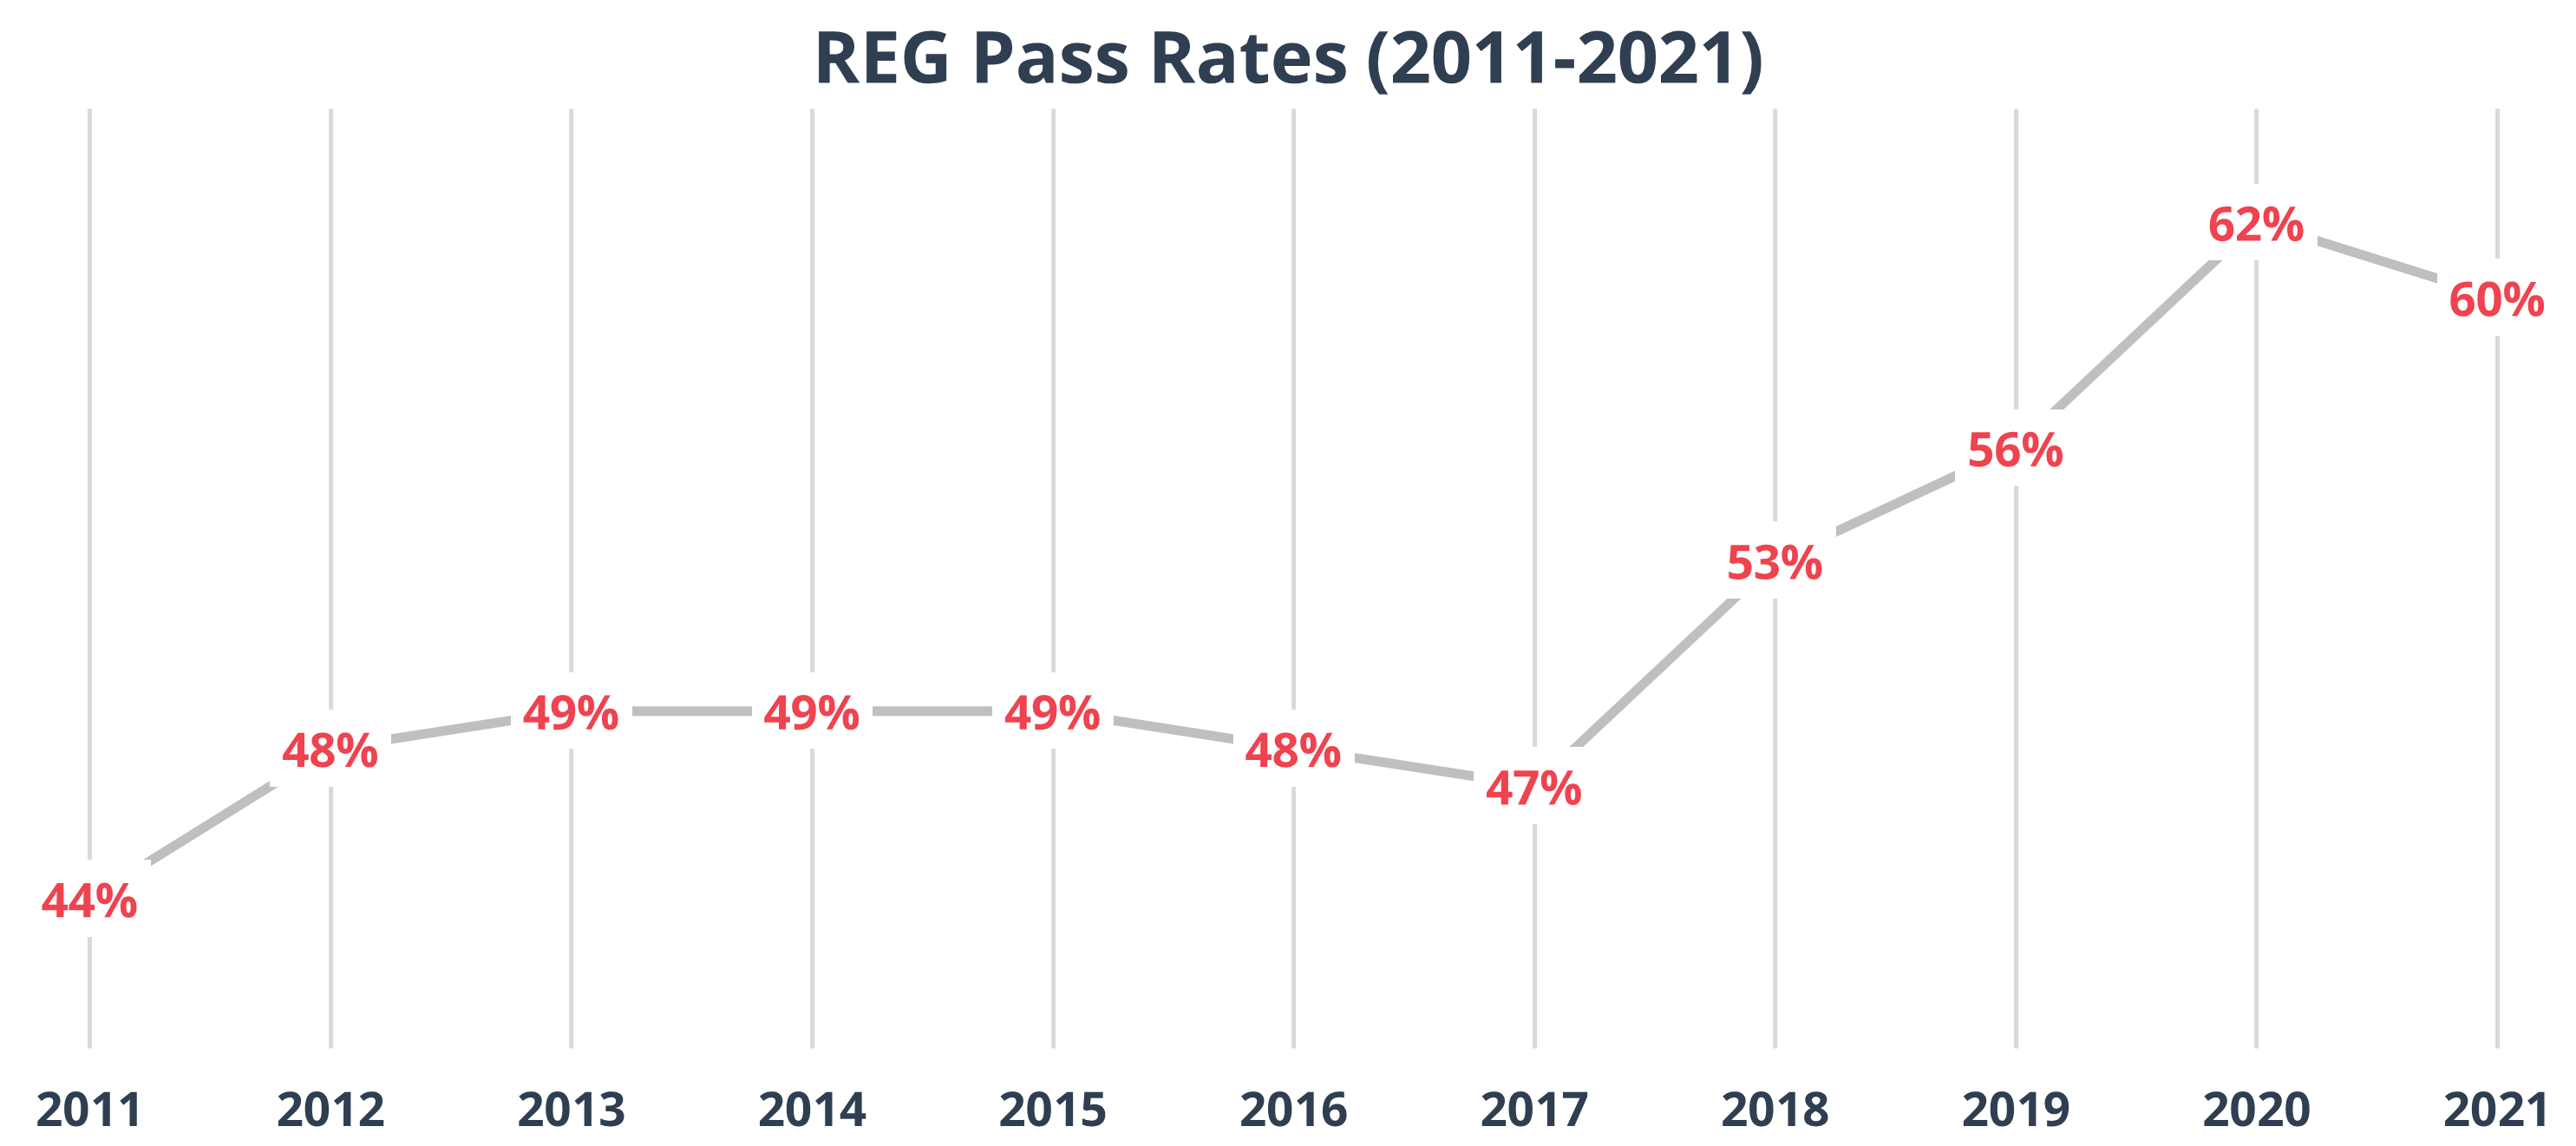 Line graph showing CPA REG Exam pass rates from 2011-2021.